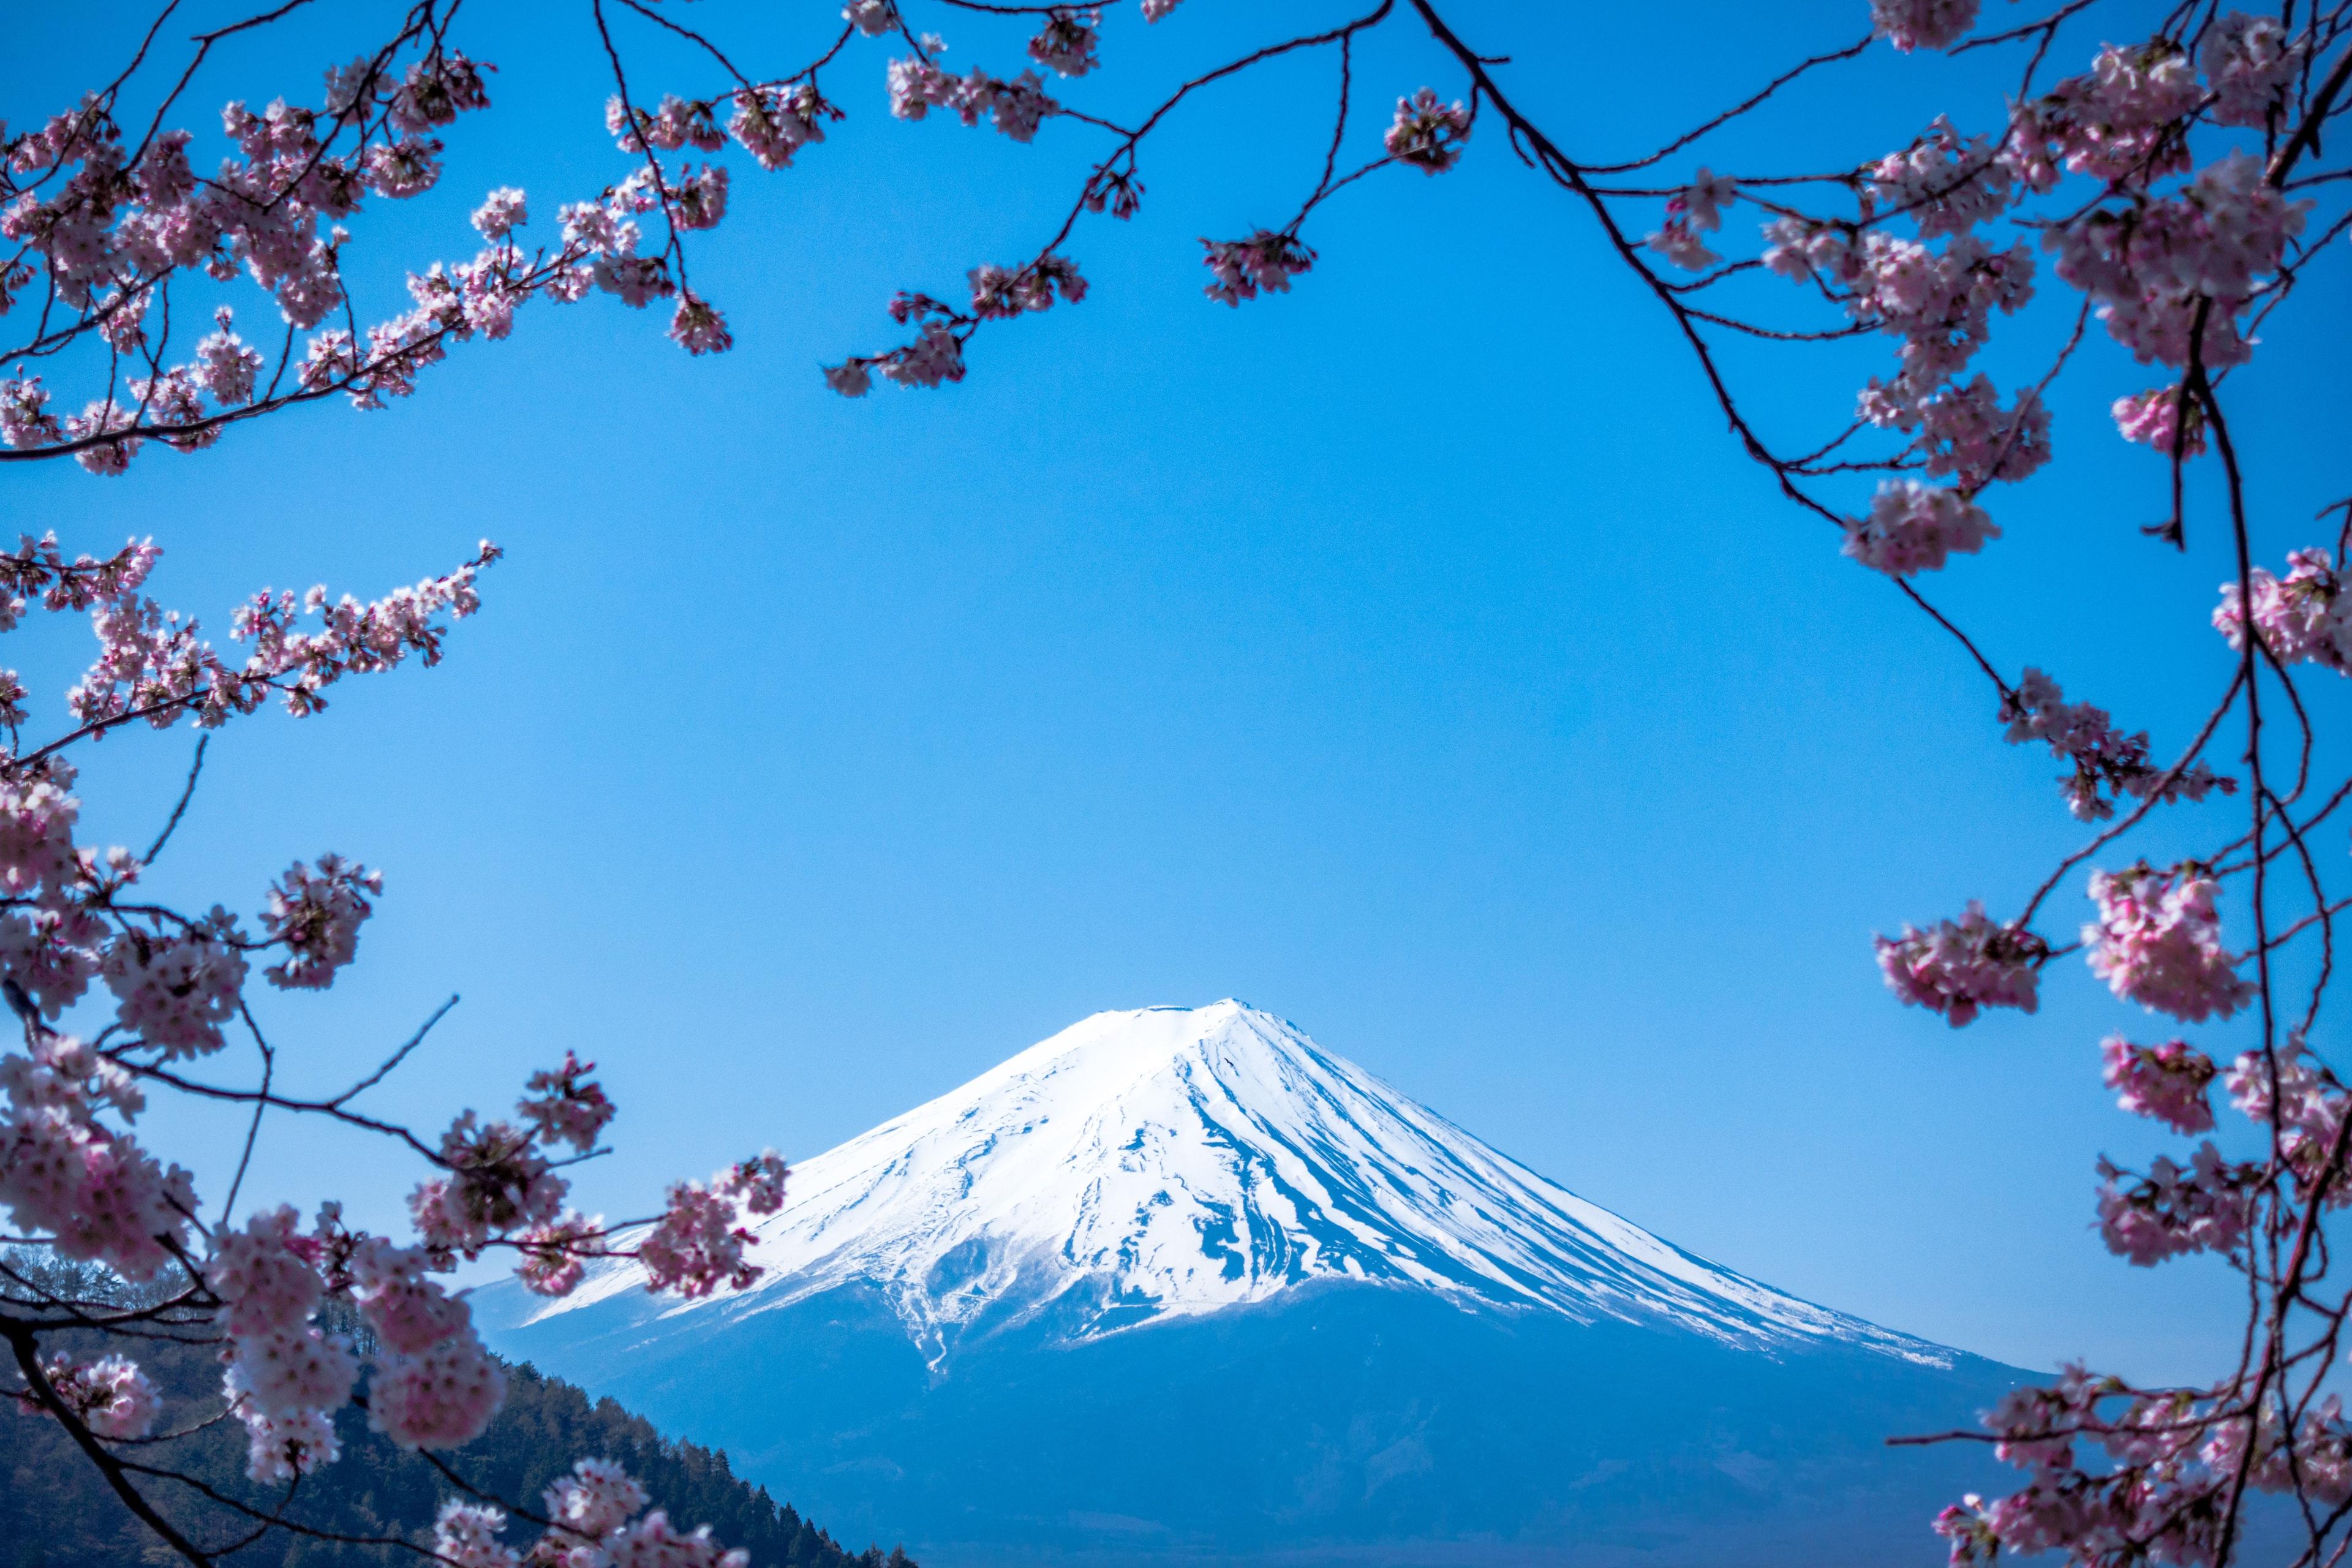 Mt fuji surrounded by cherry blossoms